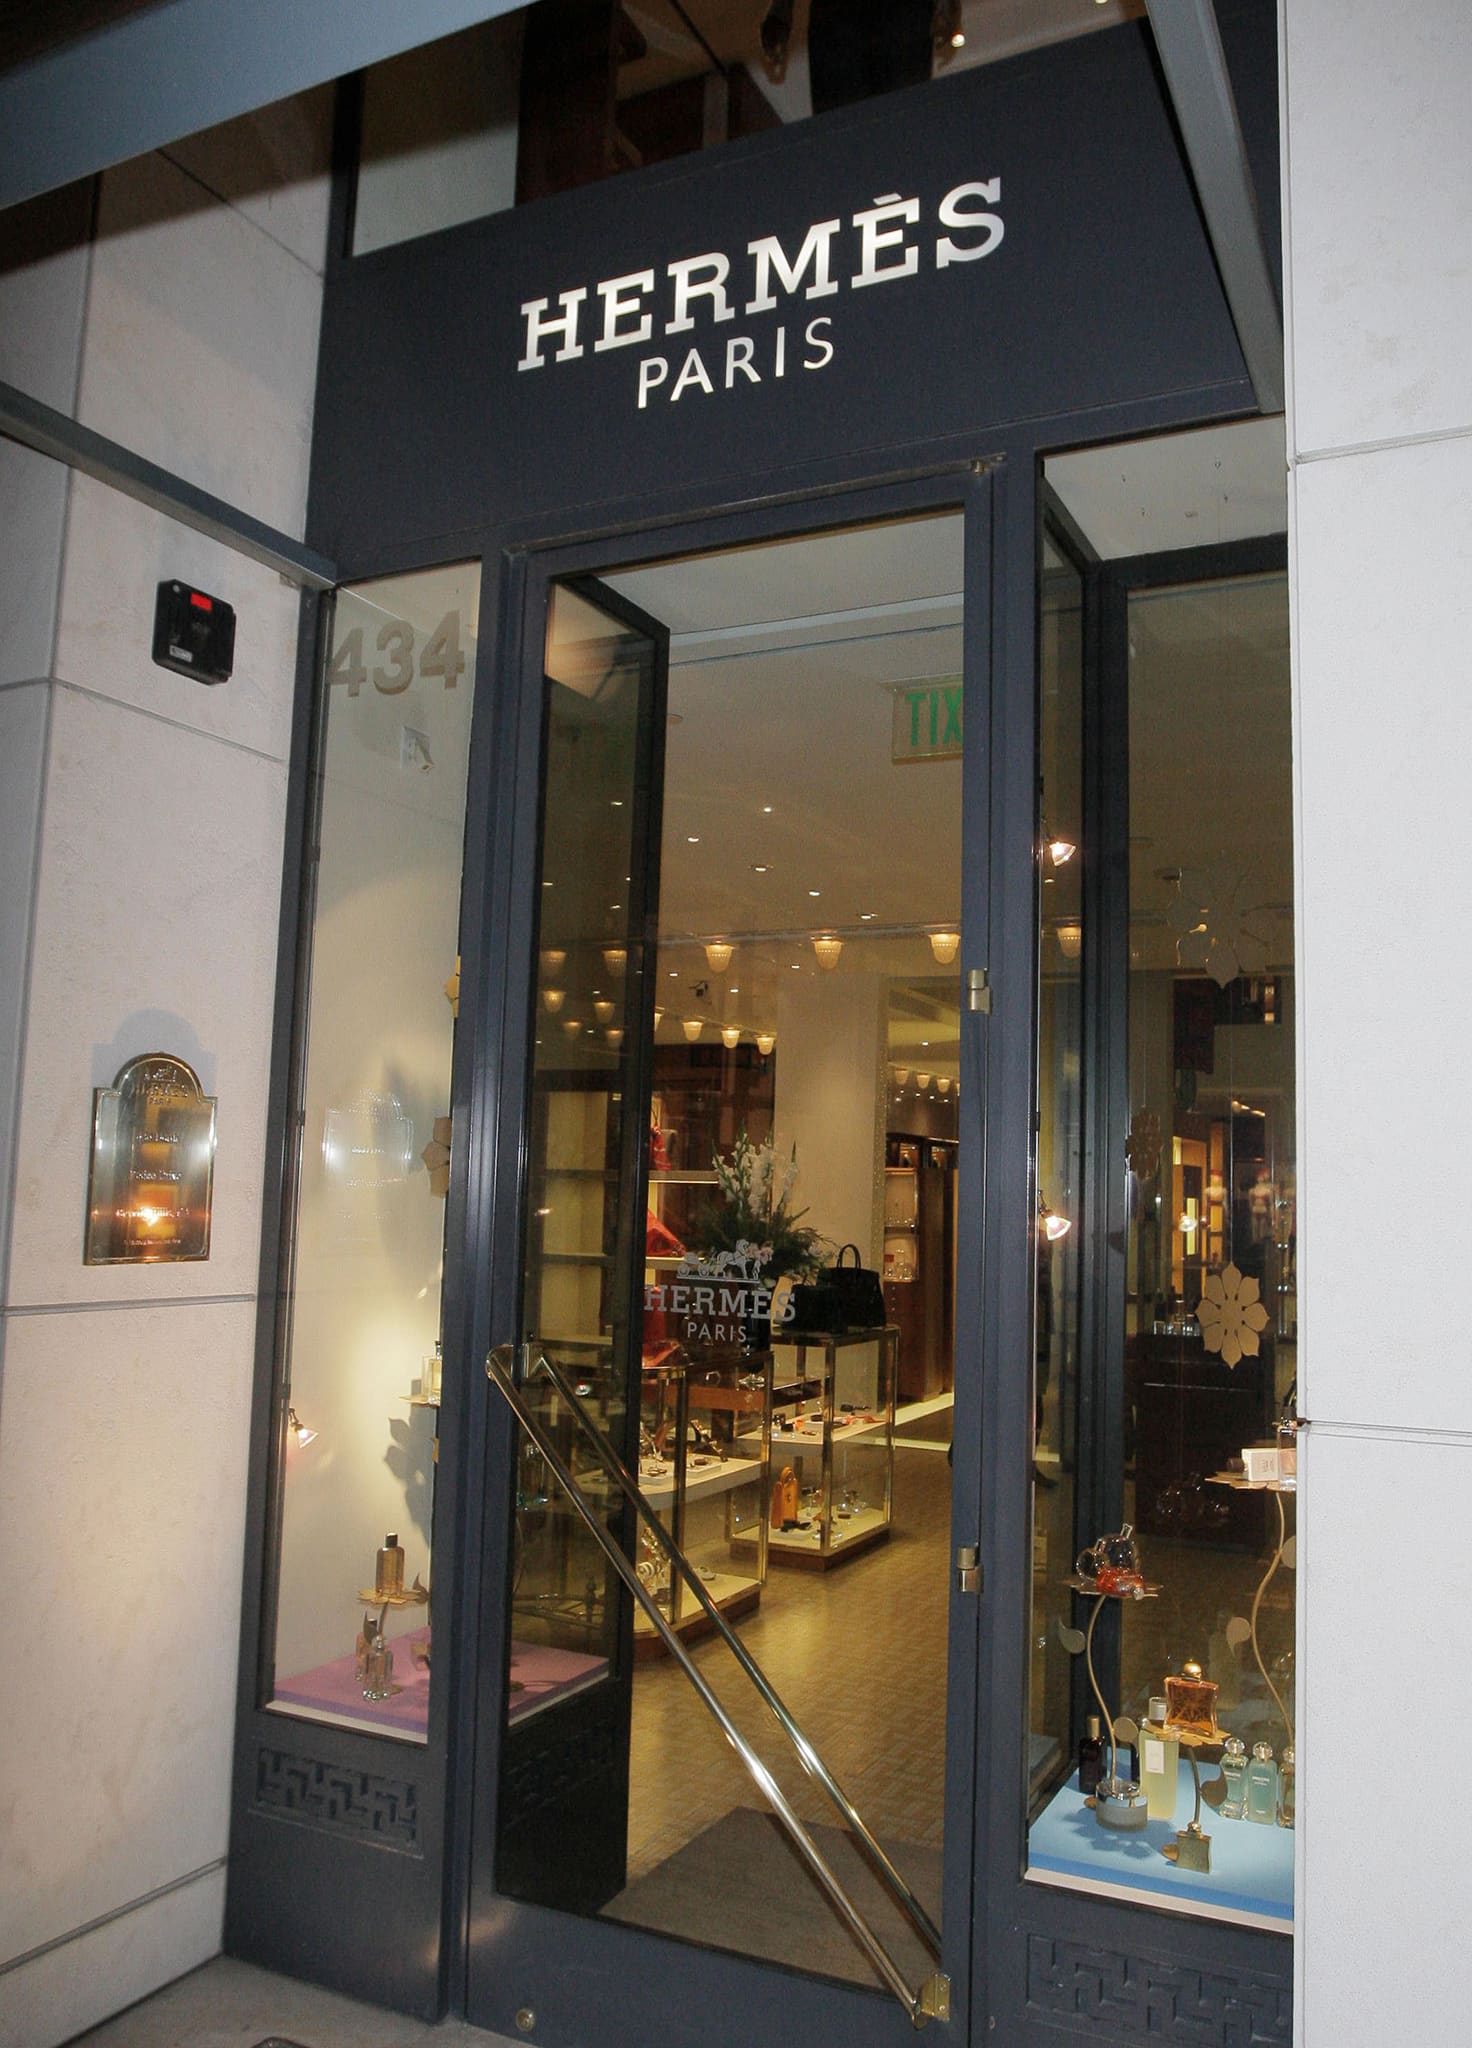 An Hermes sales associate can help you track down your dream Hermes bag